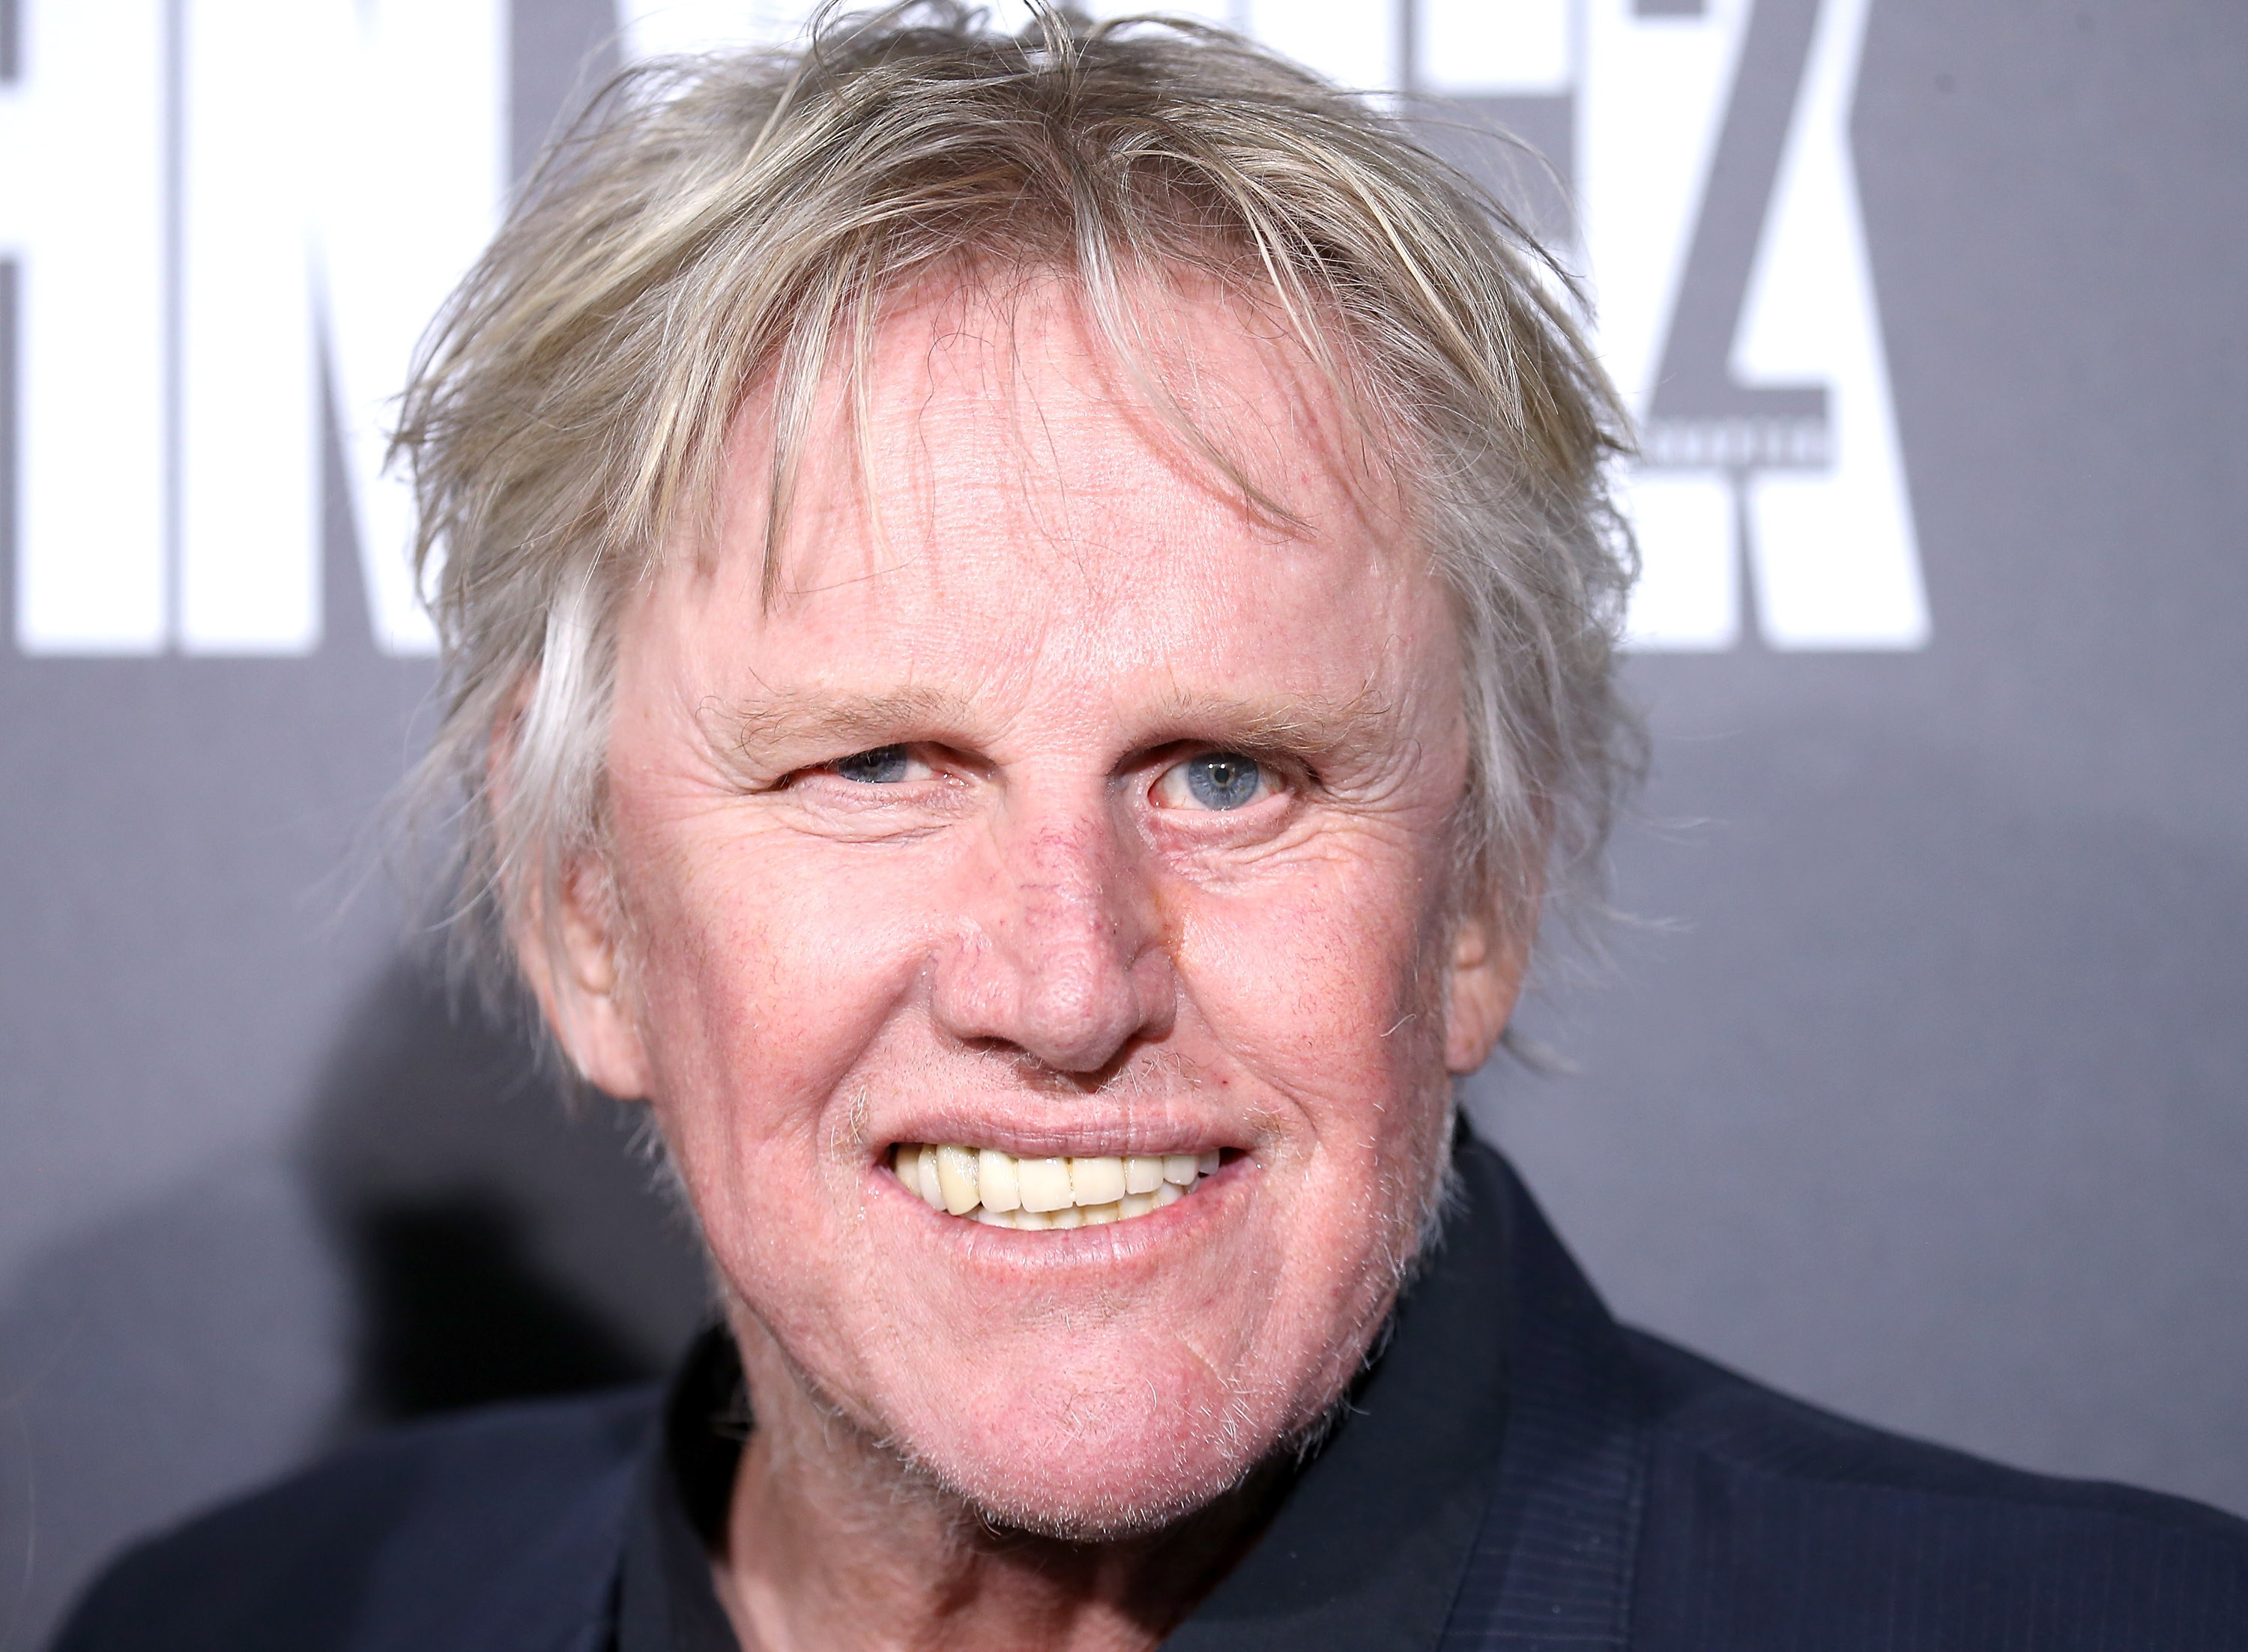 Gary Busey arrives at the Los Angeles premiere of "John Wick: Chapter Two" held at ArcLight Hollywood, on January 30, 2017, in Hollywood, California. | Source: Getty Images